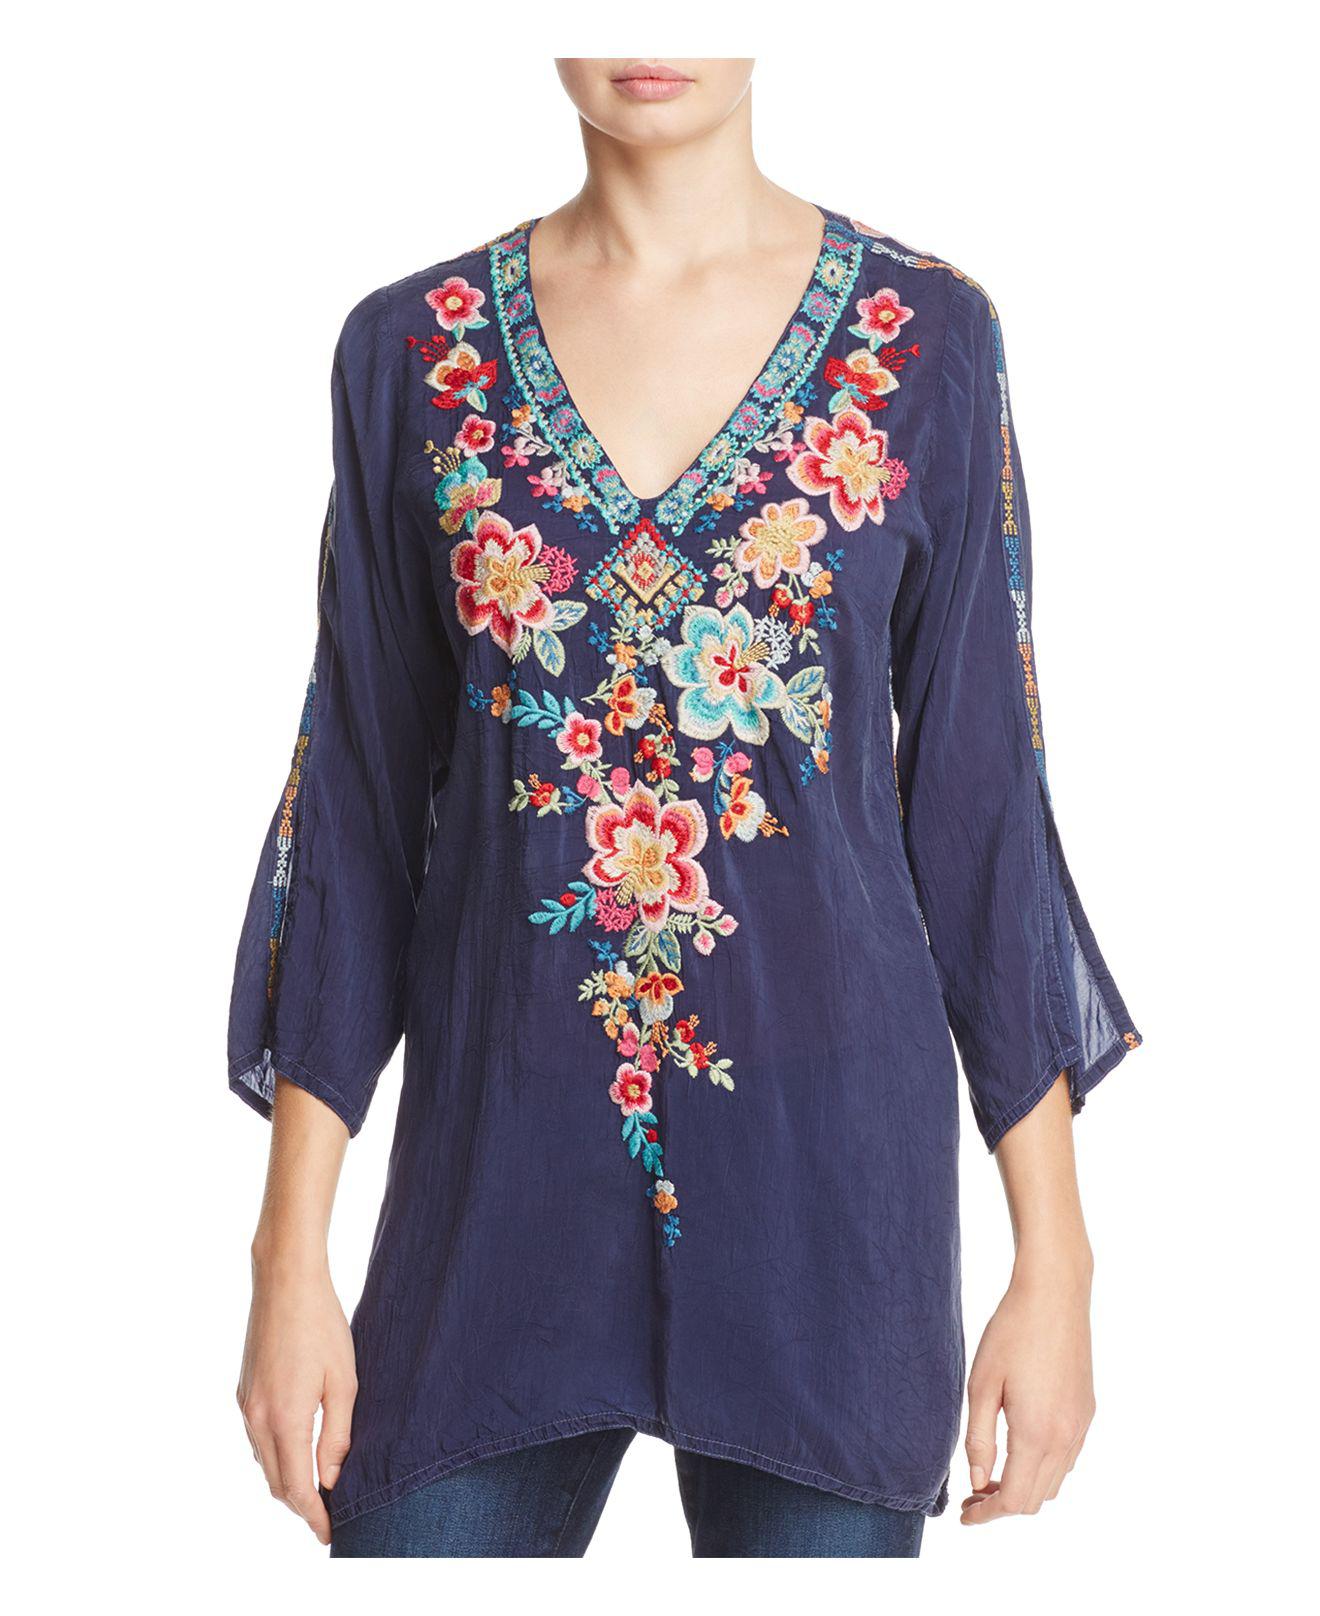 Lyst - Johnny Was Roma Floral Embroidered Tunic in Blue